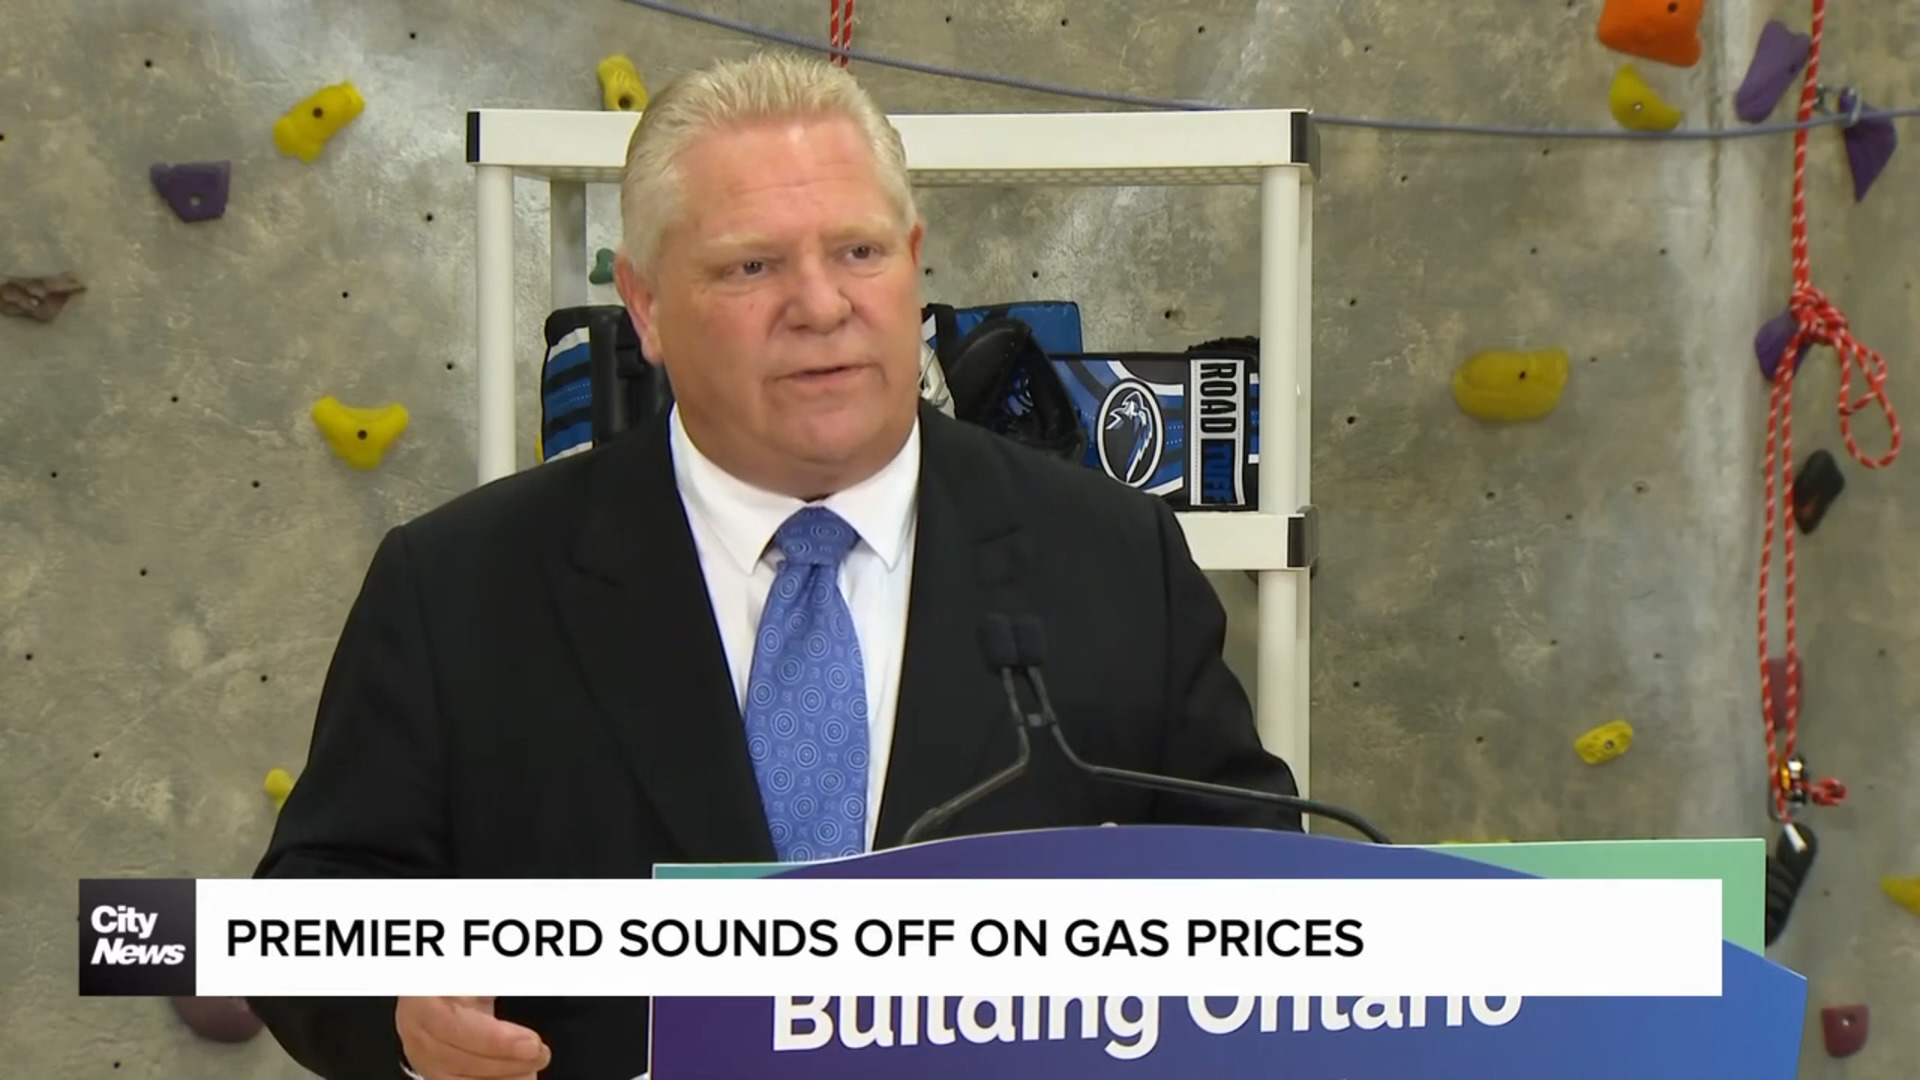 Premier Ford sounds off on gas prices